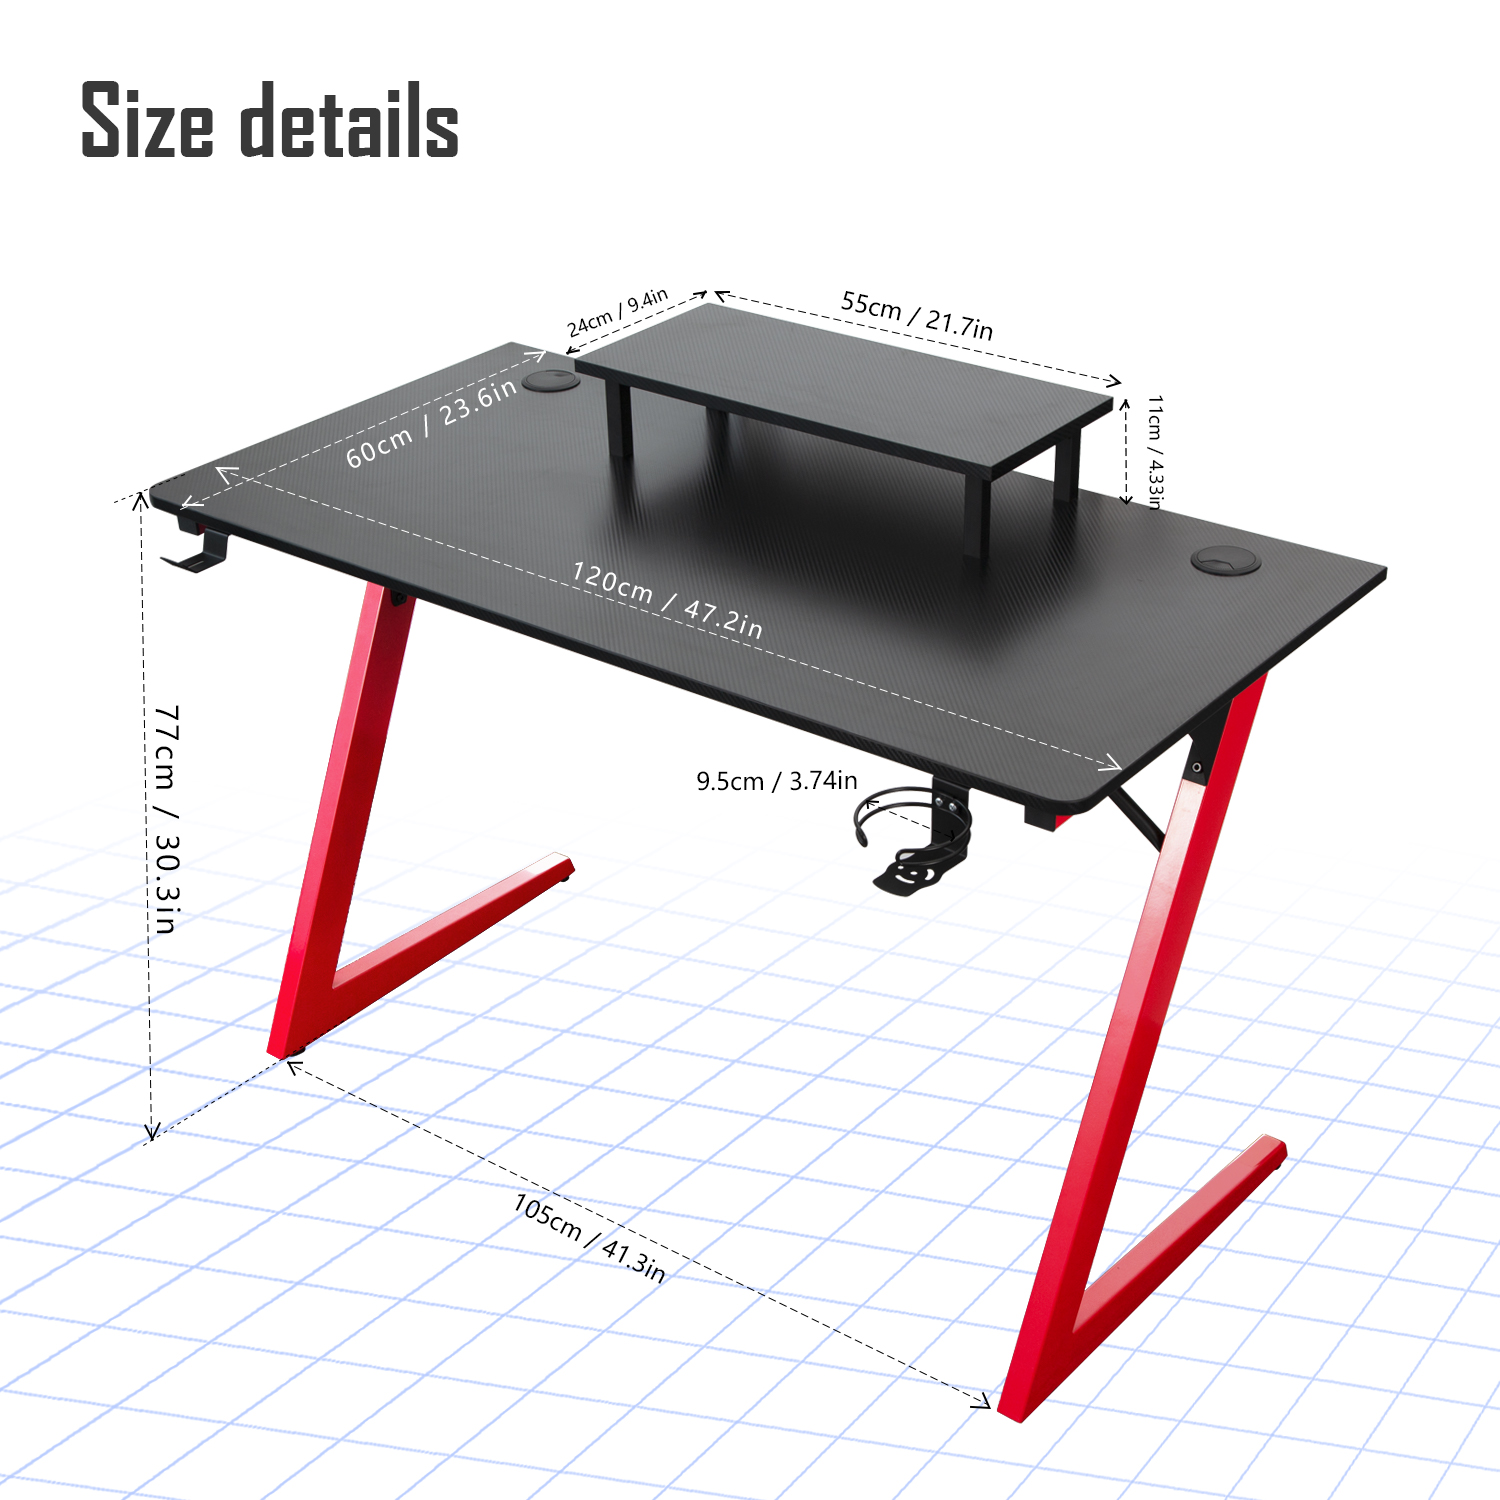 TOPSKY Gaming Desk Home Office Gaming Table with Cup Holder Headphone Hook 47"/55"  GT-101A/GT-101B